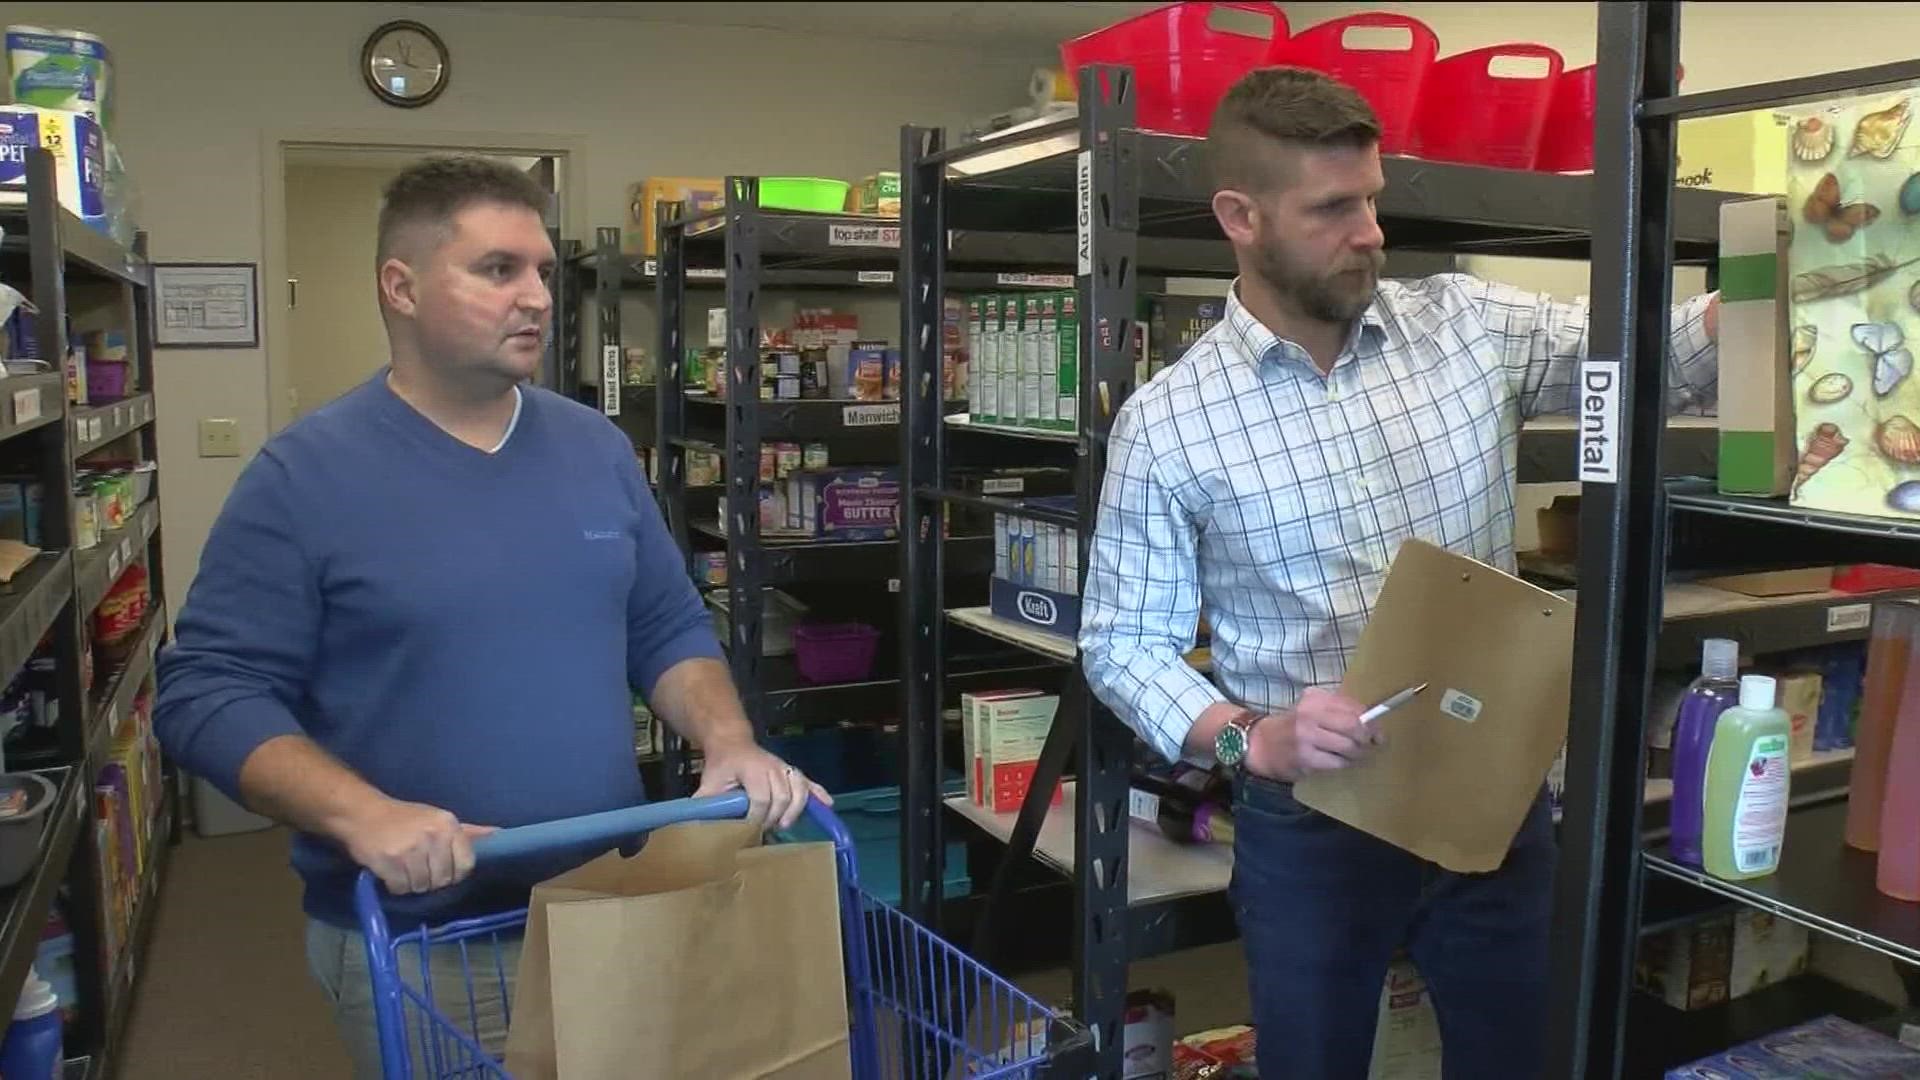 Local organizations are providing food and other essentials for Ukrainians arriving in the U.S.